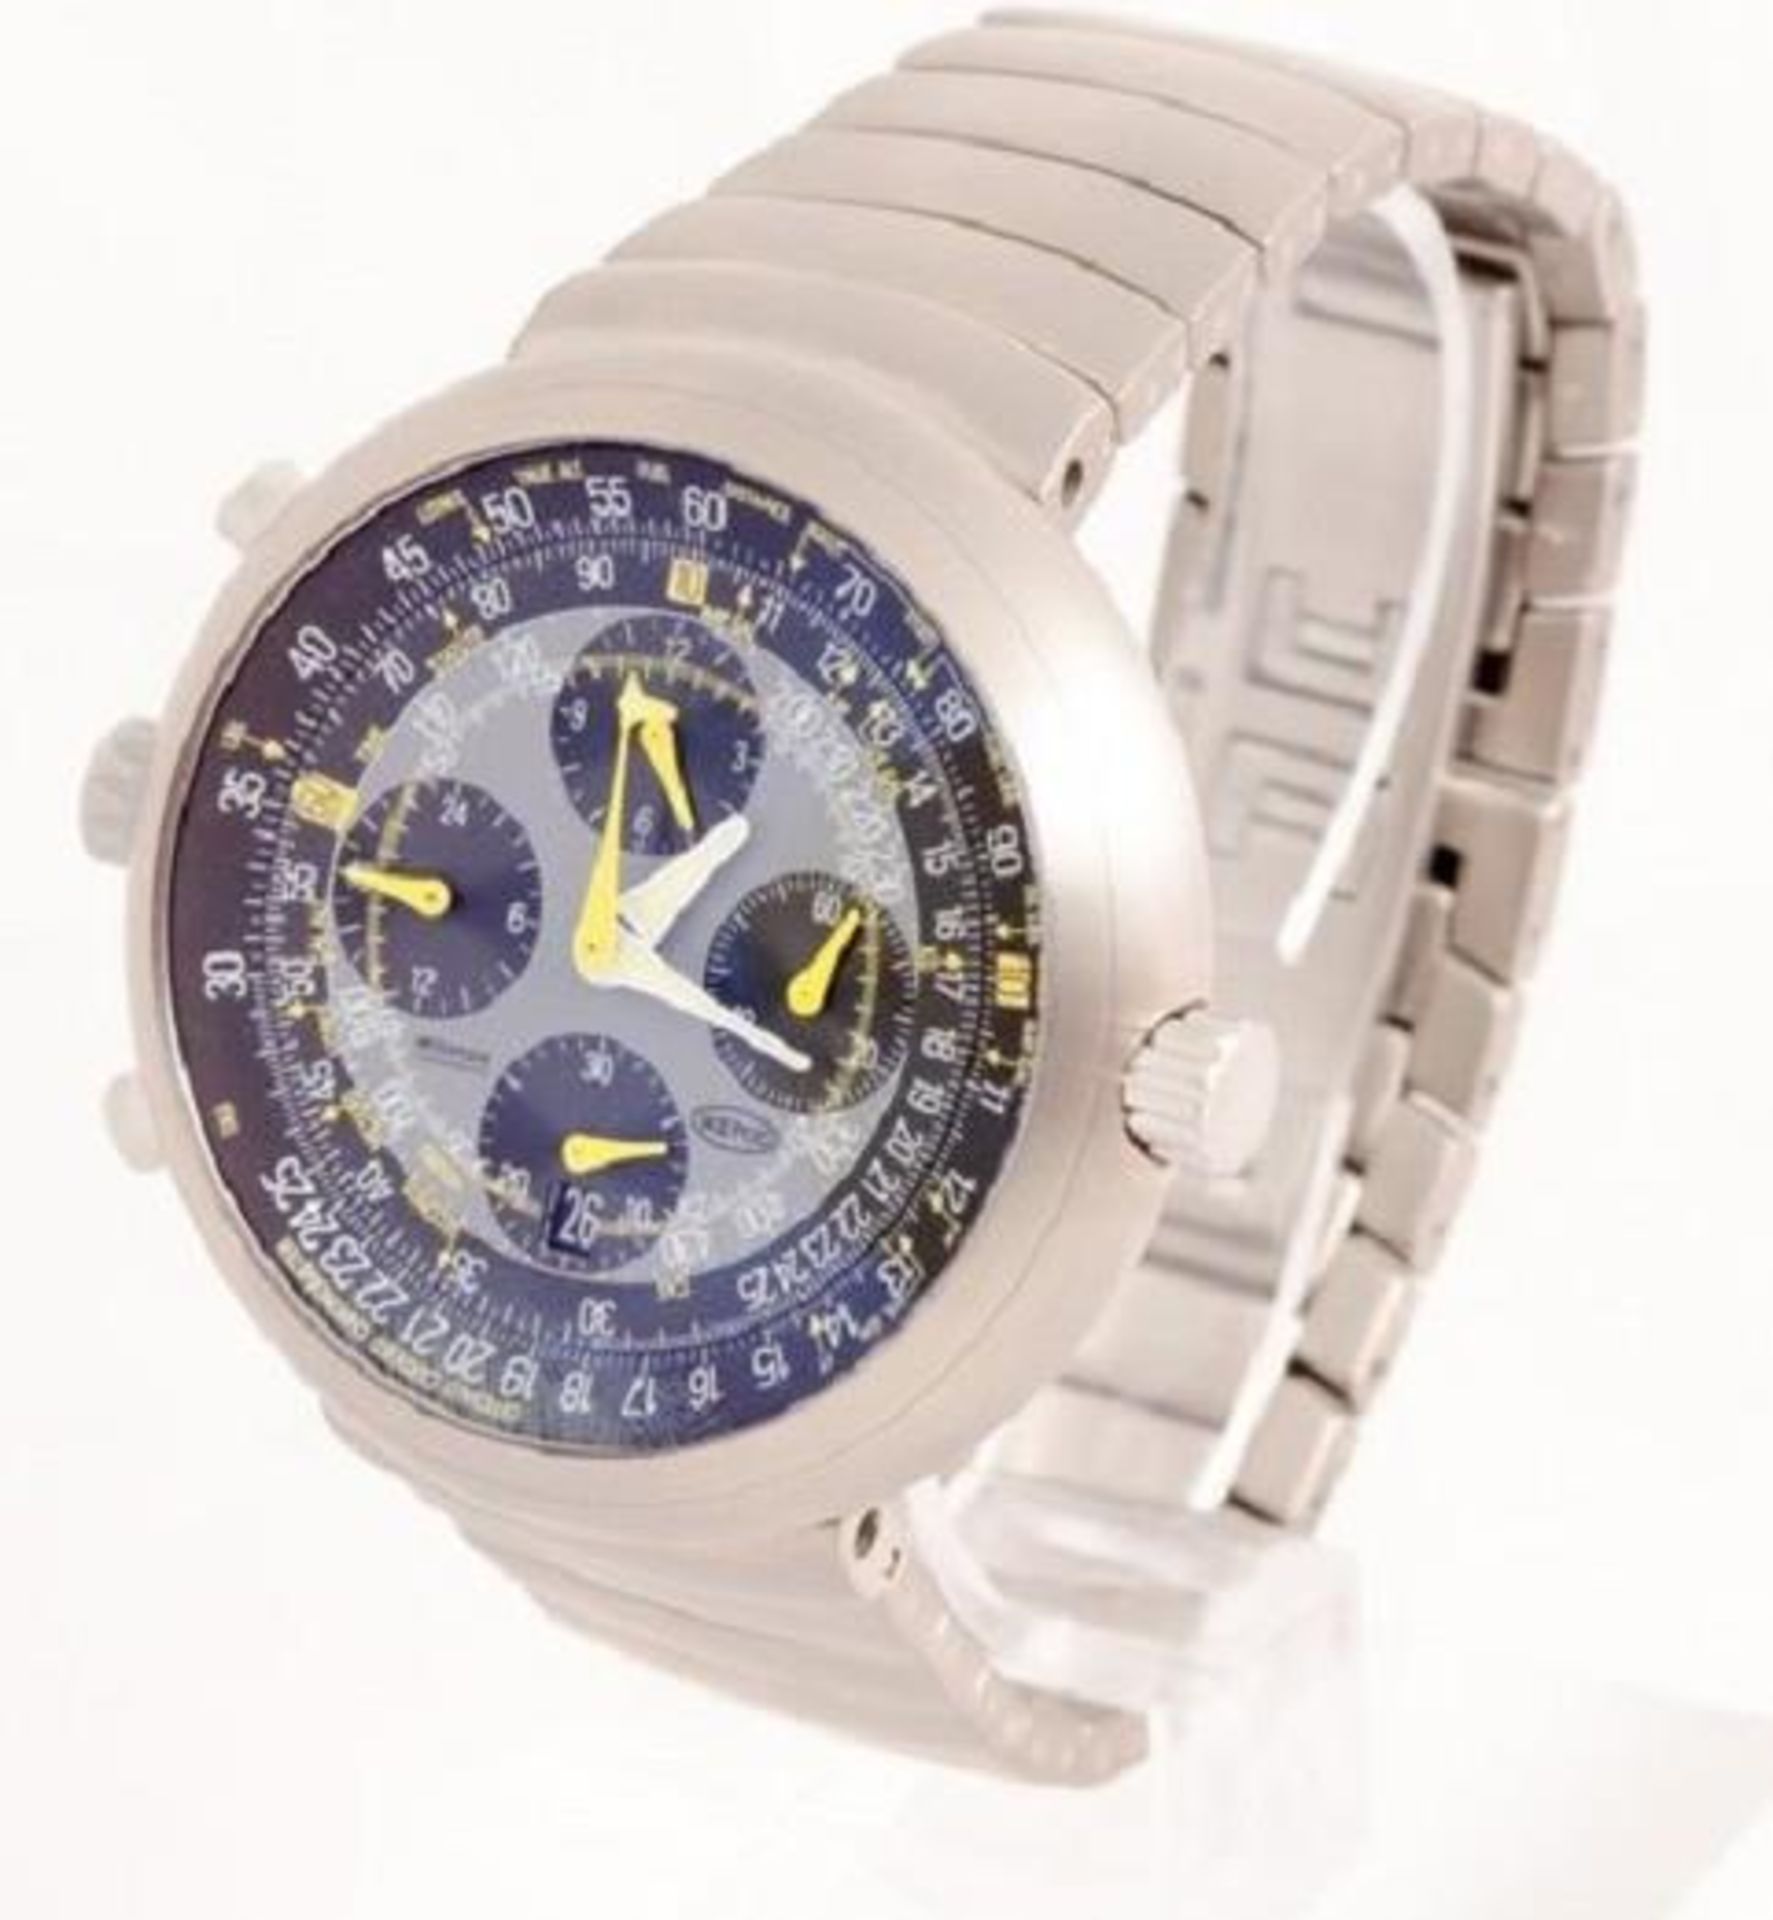 Ikepod Megapode Flyback Gents Titanium Watch - Image 2 of 4